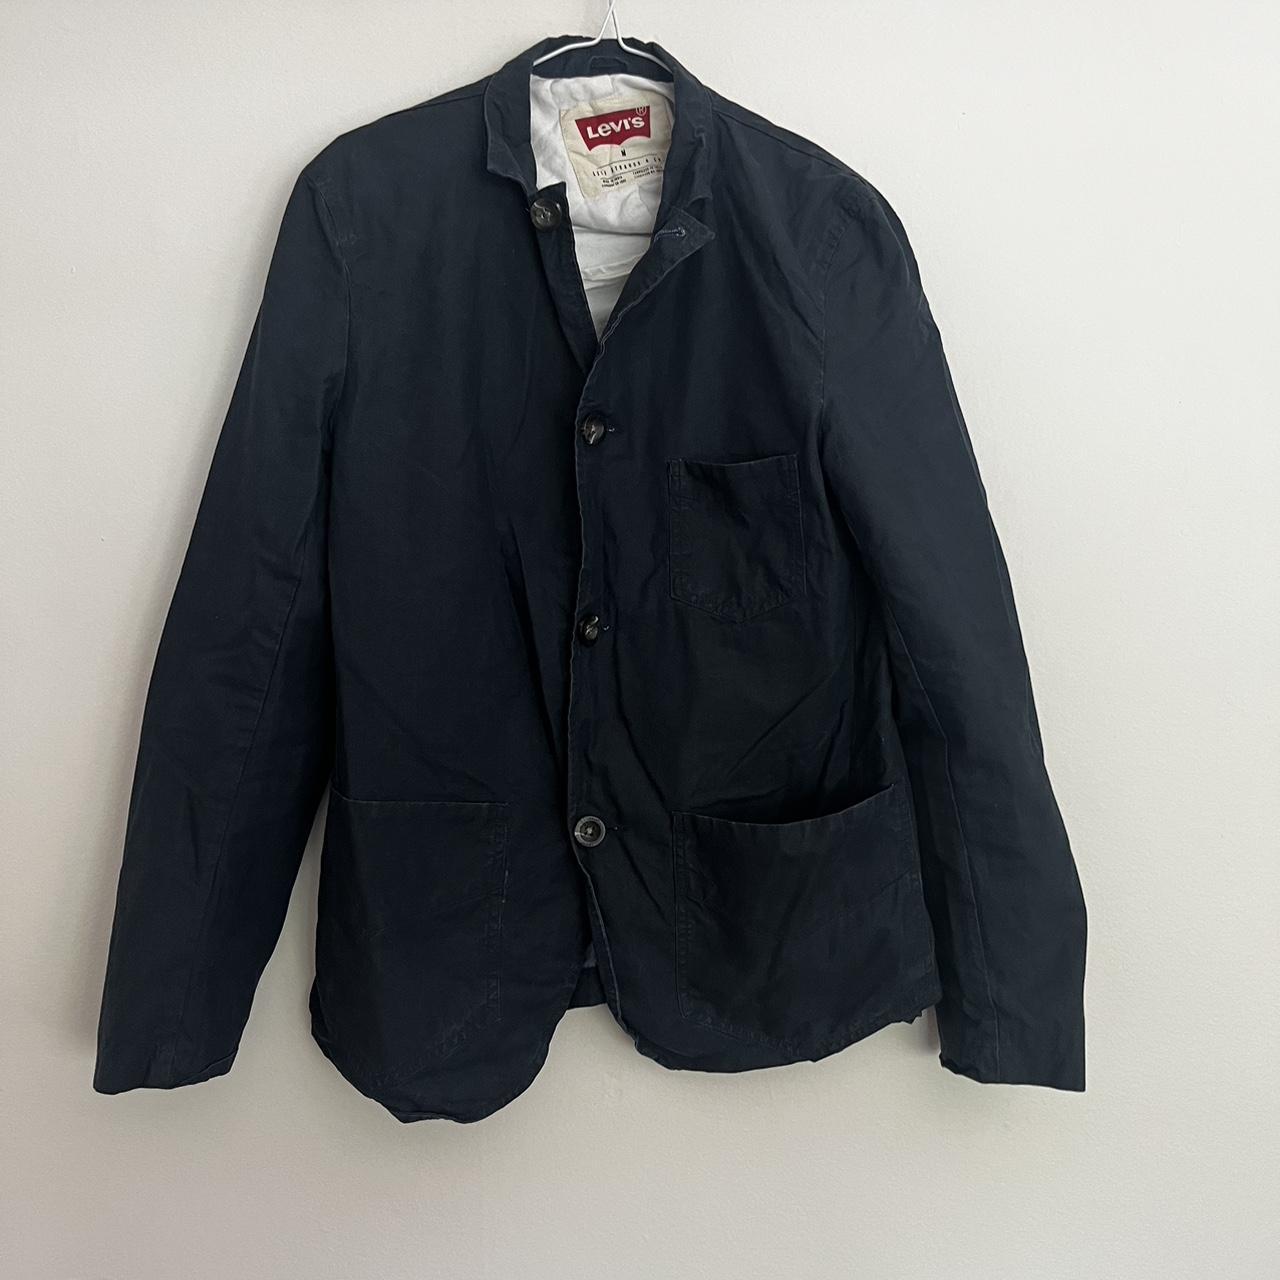 Levi’s French Chore Jacket Would fit a large, if... - Depop